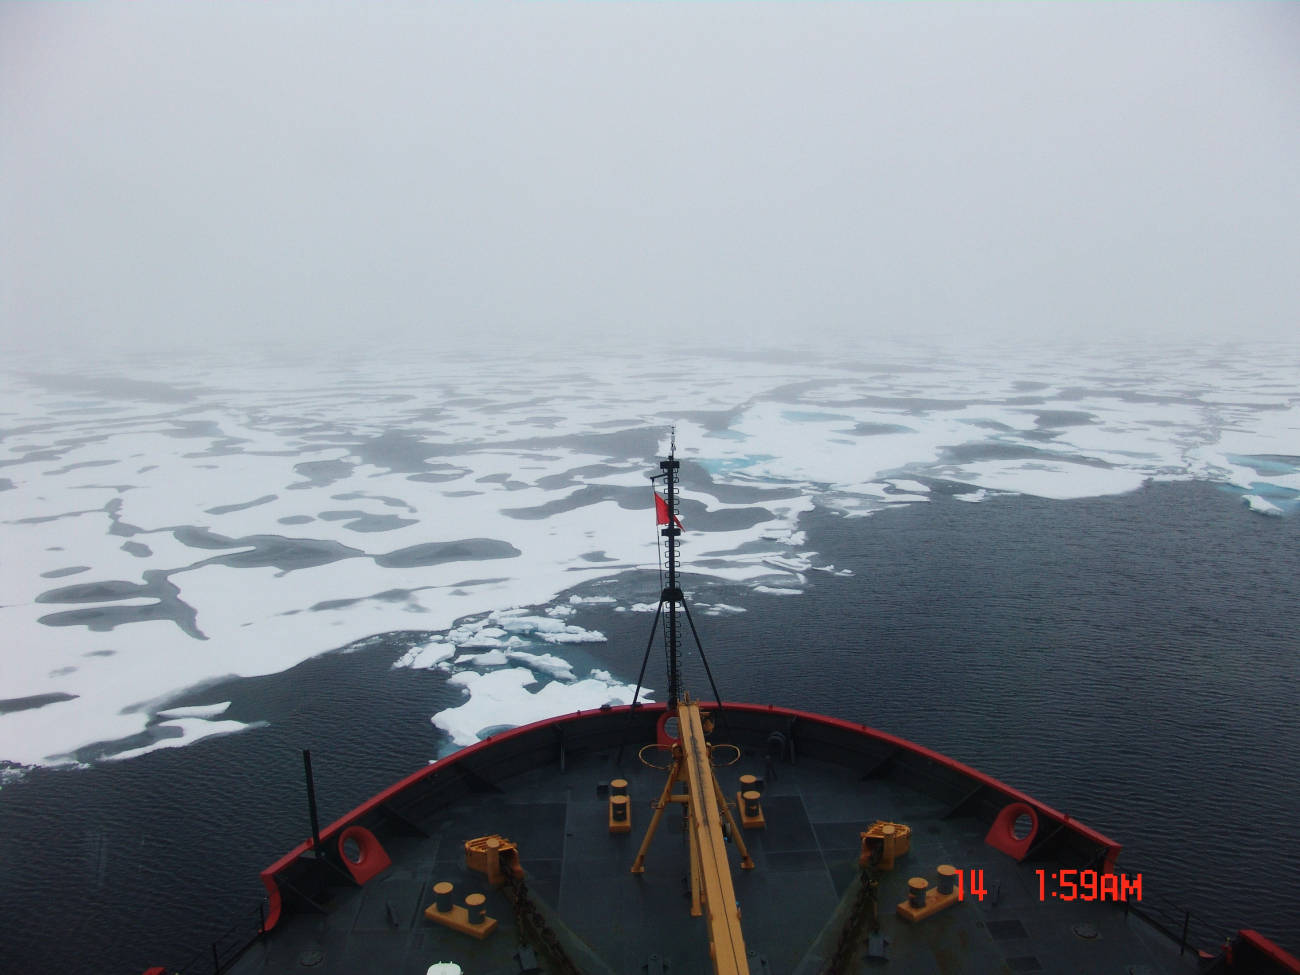 Approaching ice floes and melt pools from the edge of a polynya